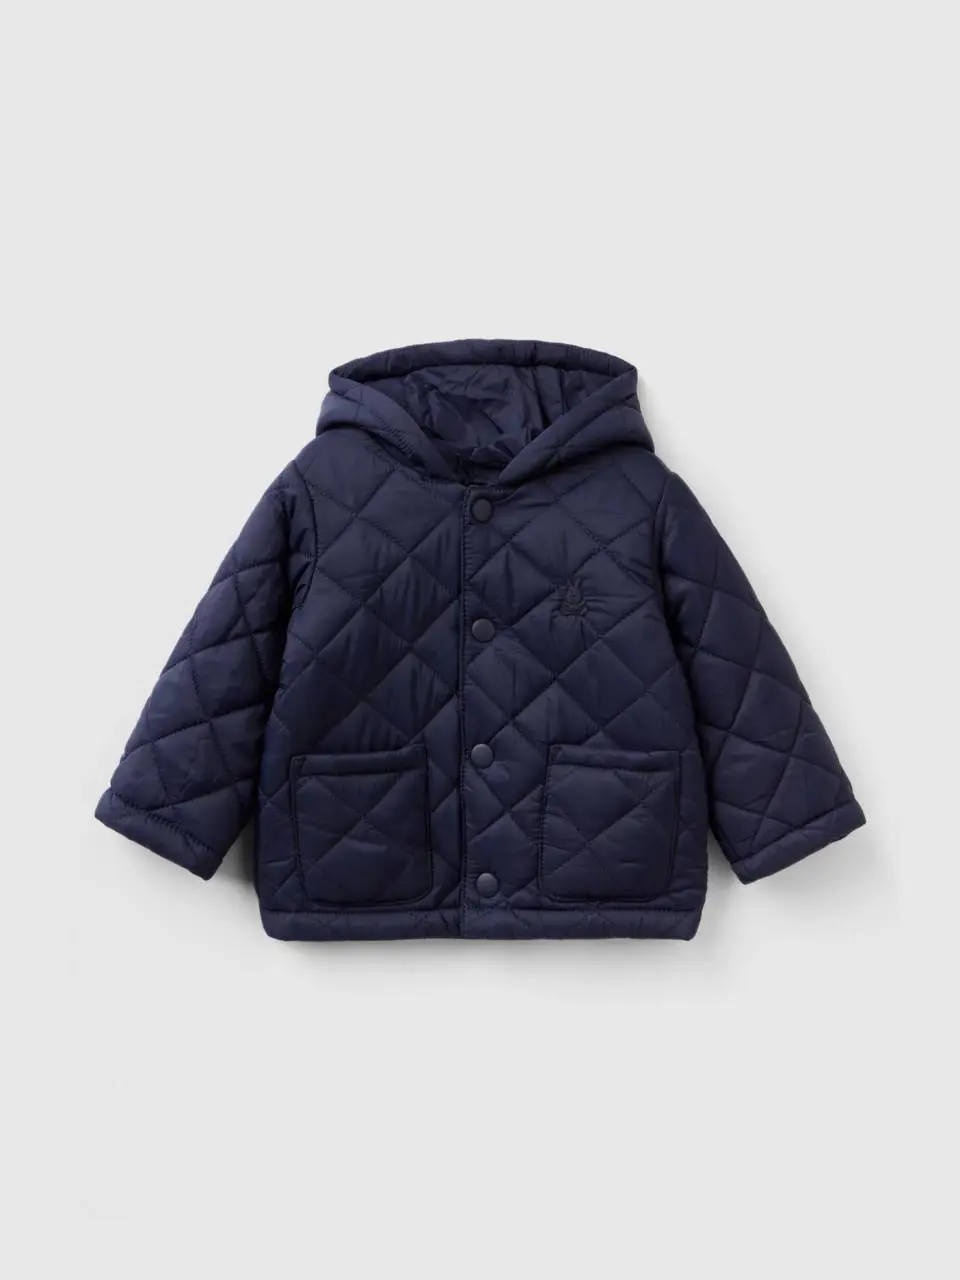 Benetton quilted jacket with hood. 1